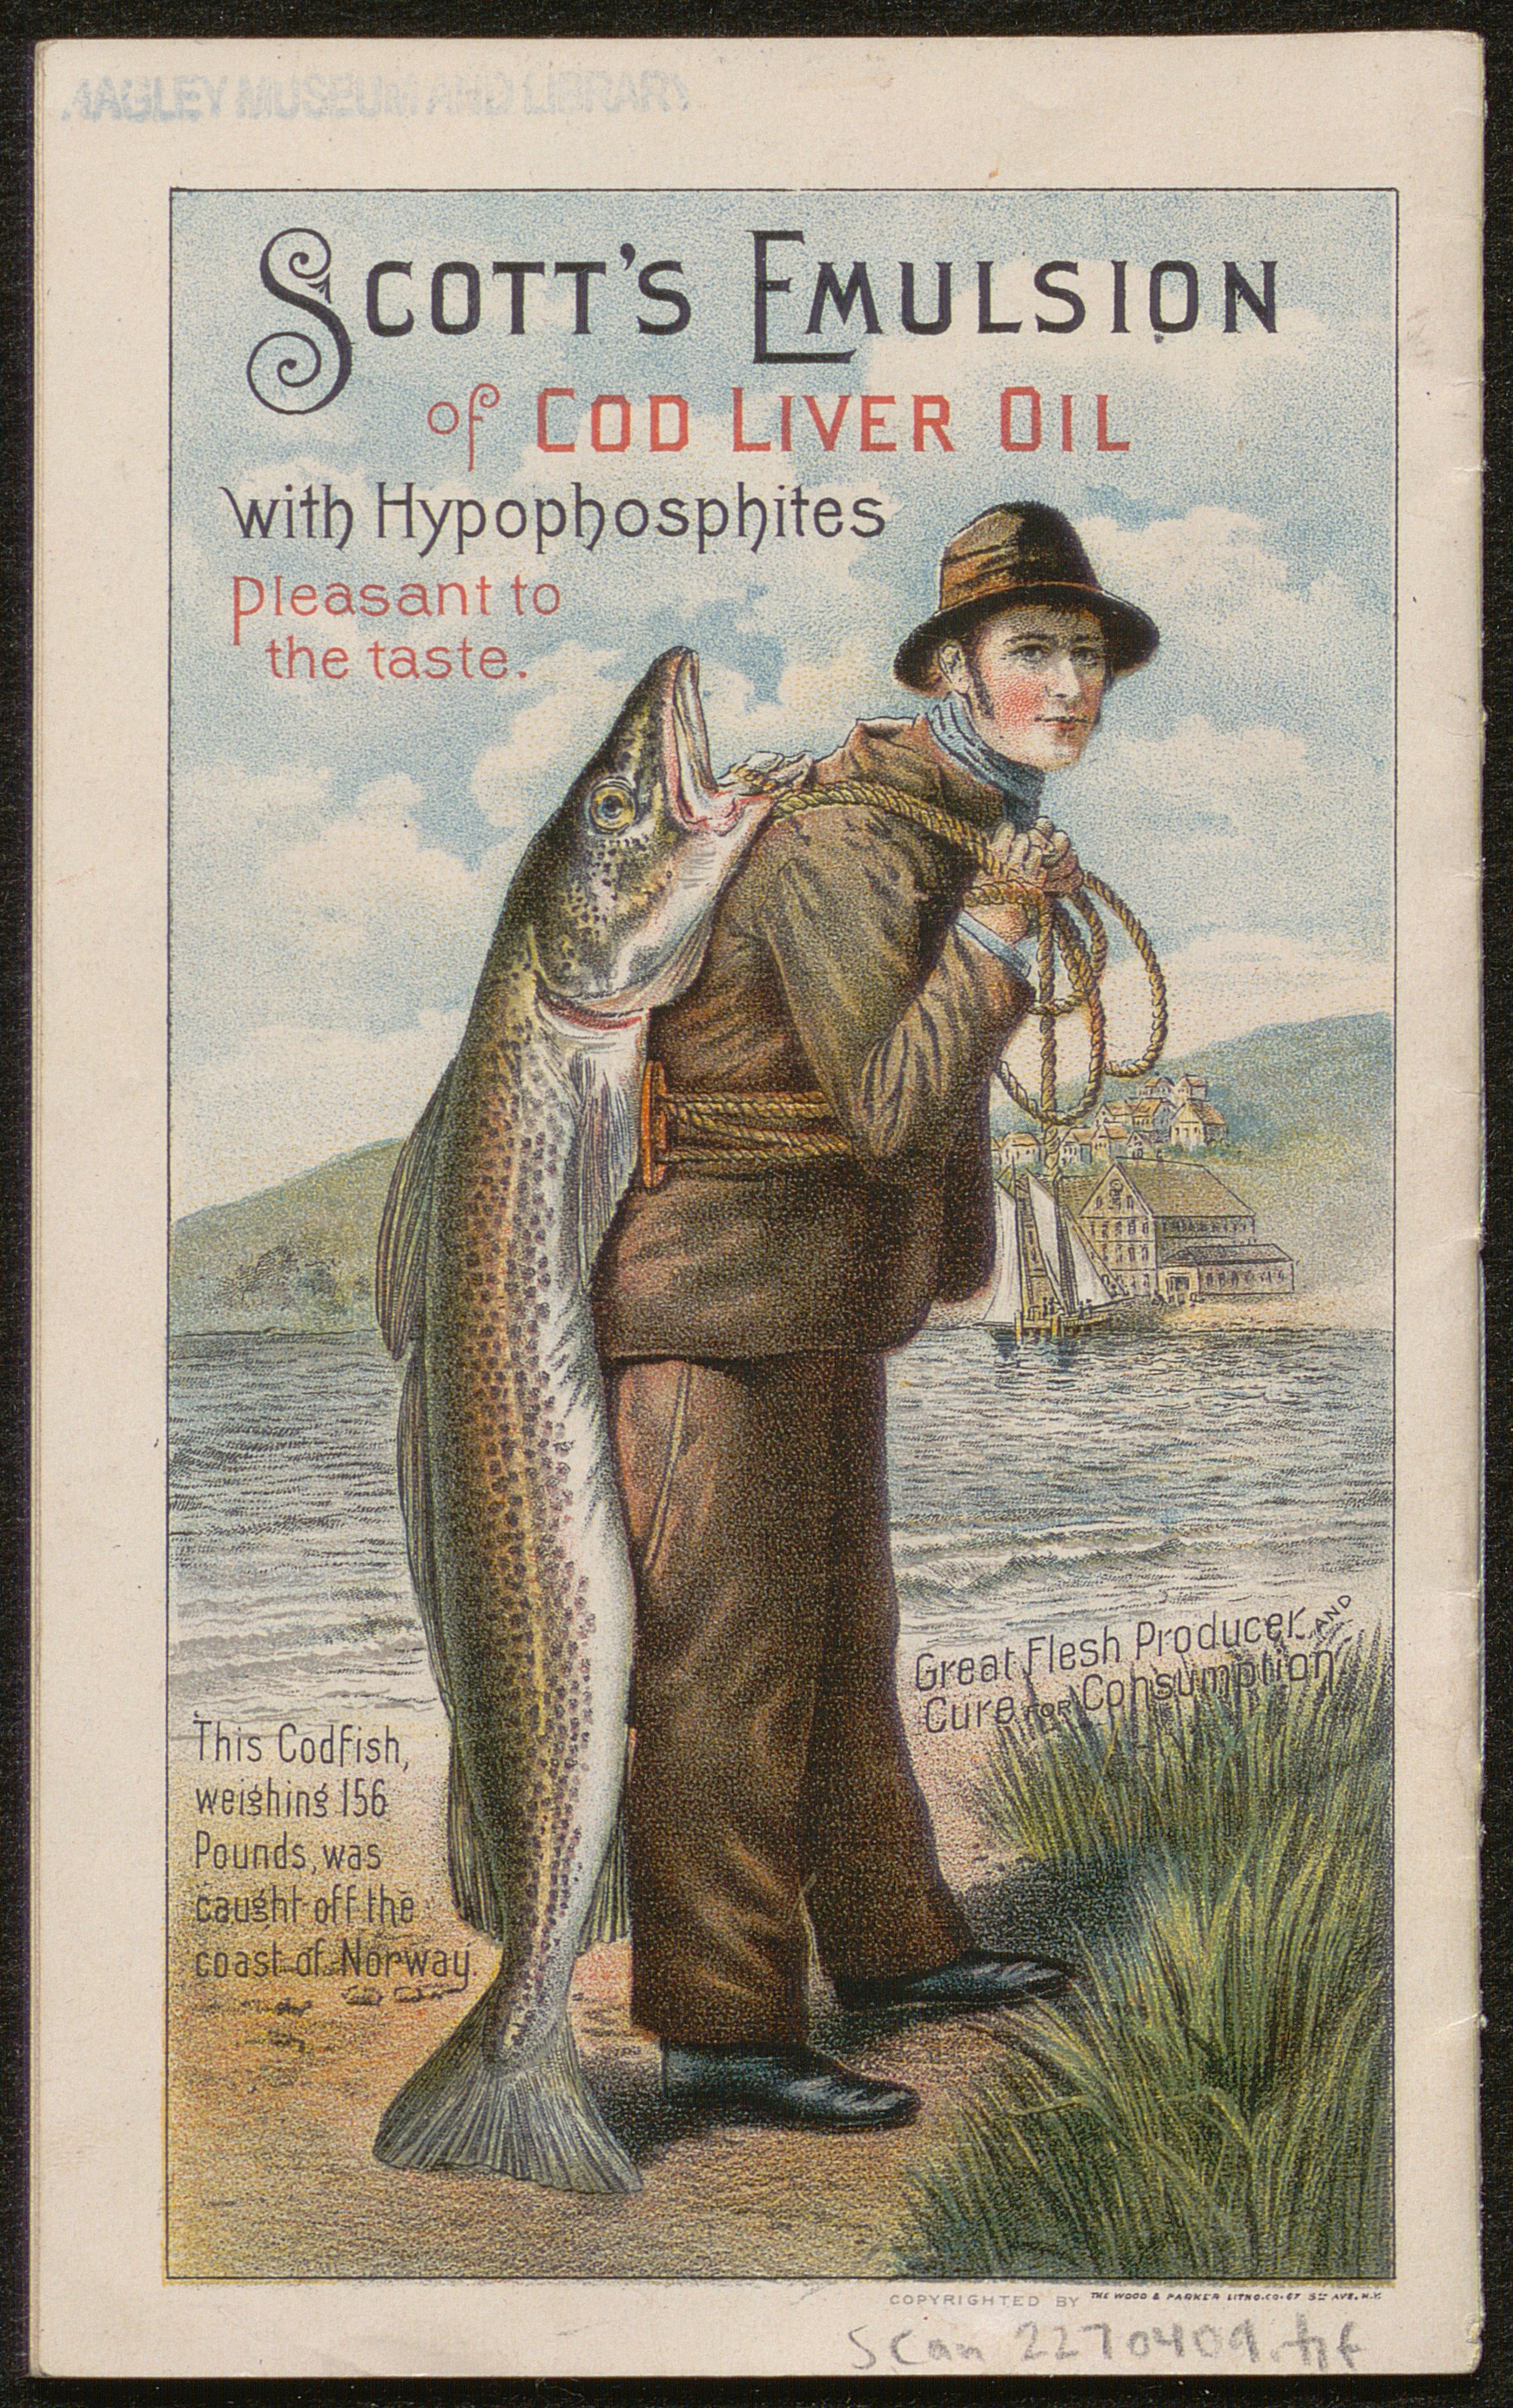 Advertisement for cold liver oil. Illustration of a man carrying a very large codfish on his back.